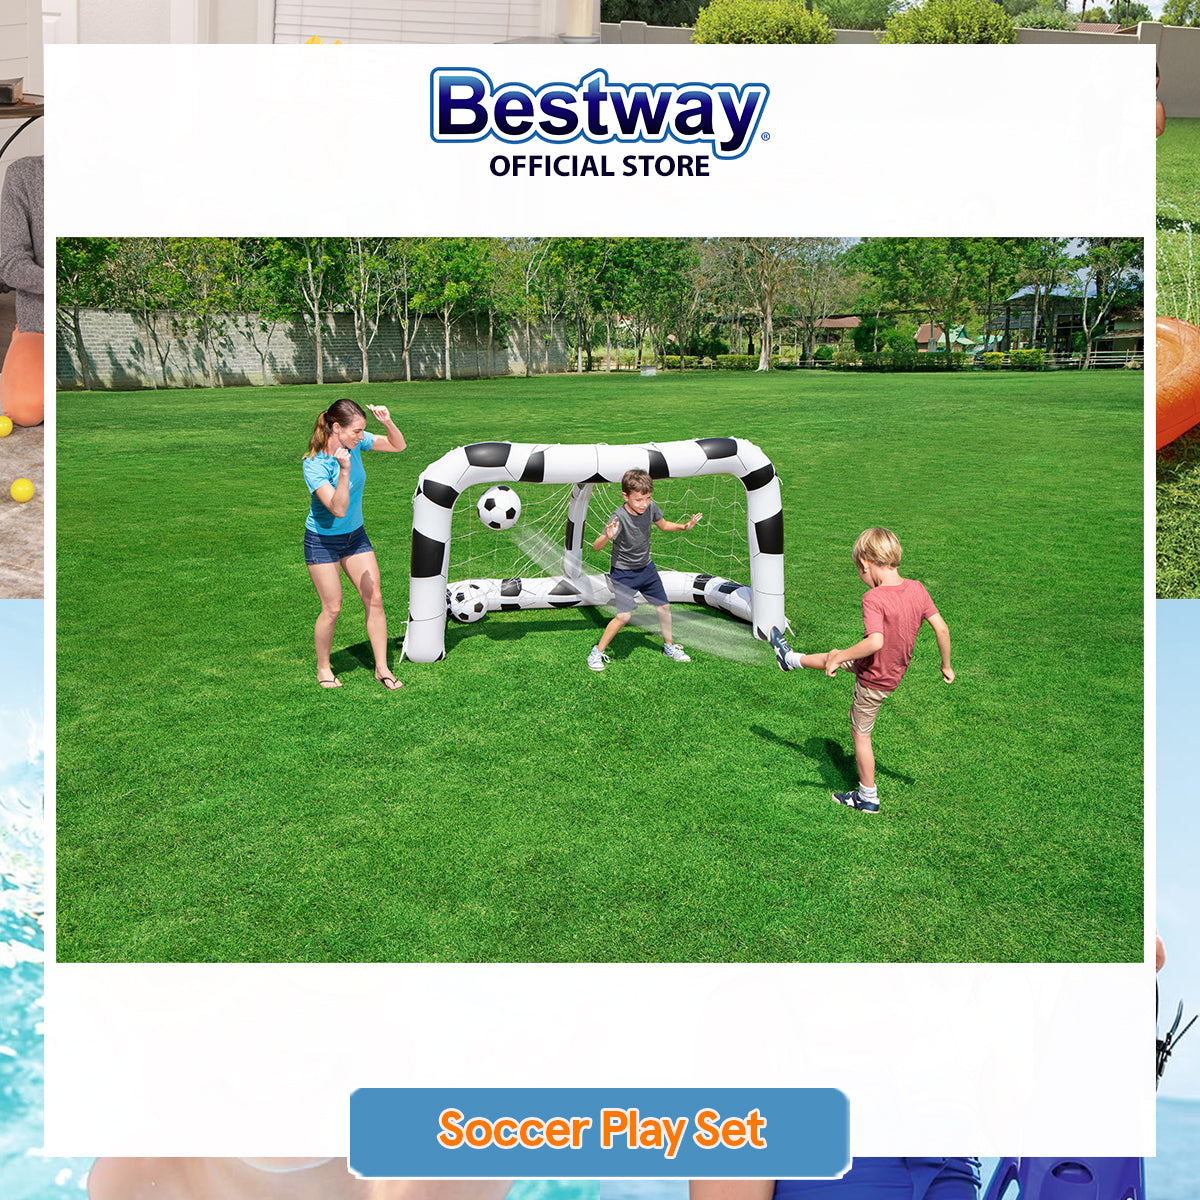 Bestway Inflatable Soccer Play Set